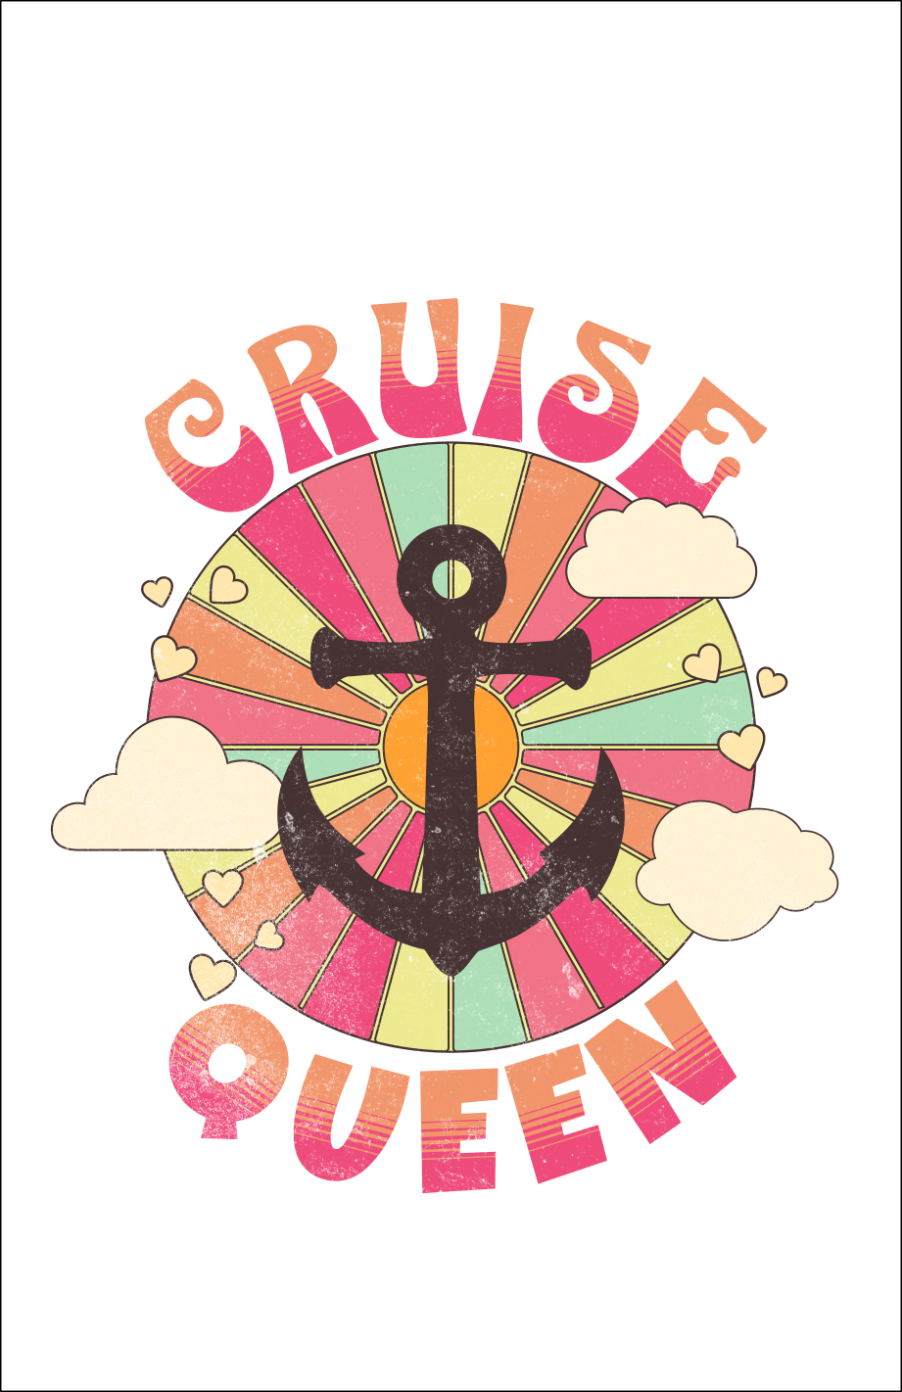 Cruise Queen Luggage Tag